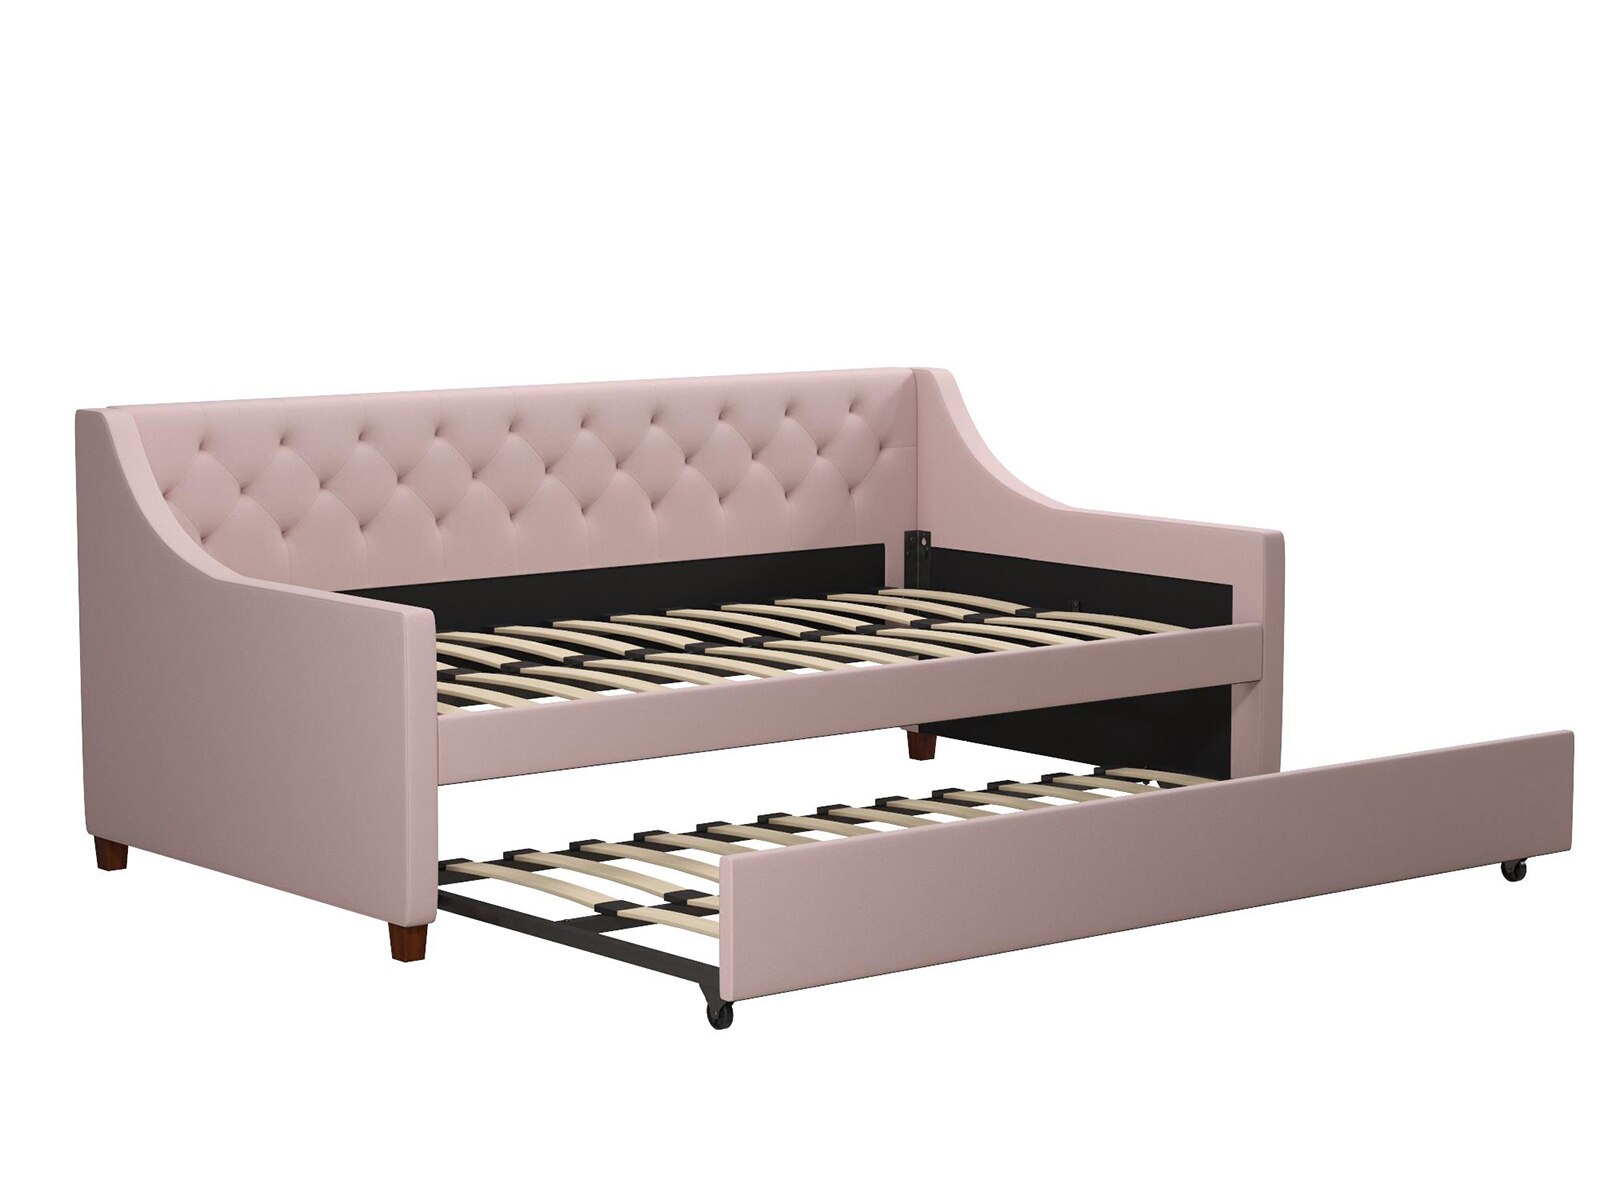 Her Majesty Daybed & Trundle